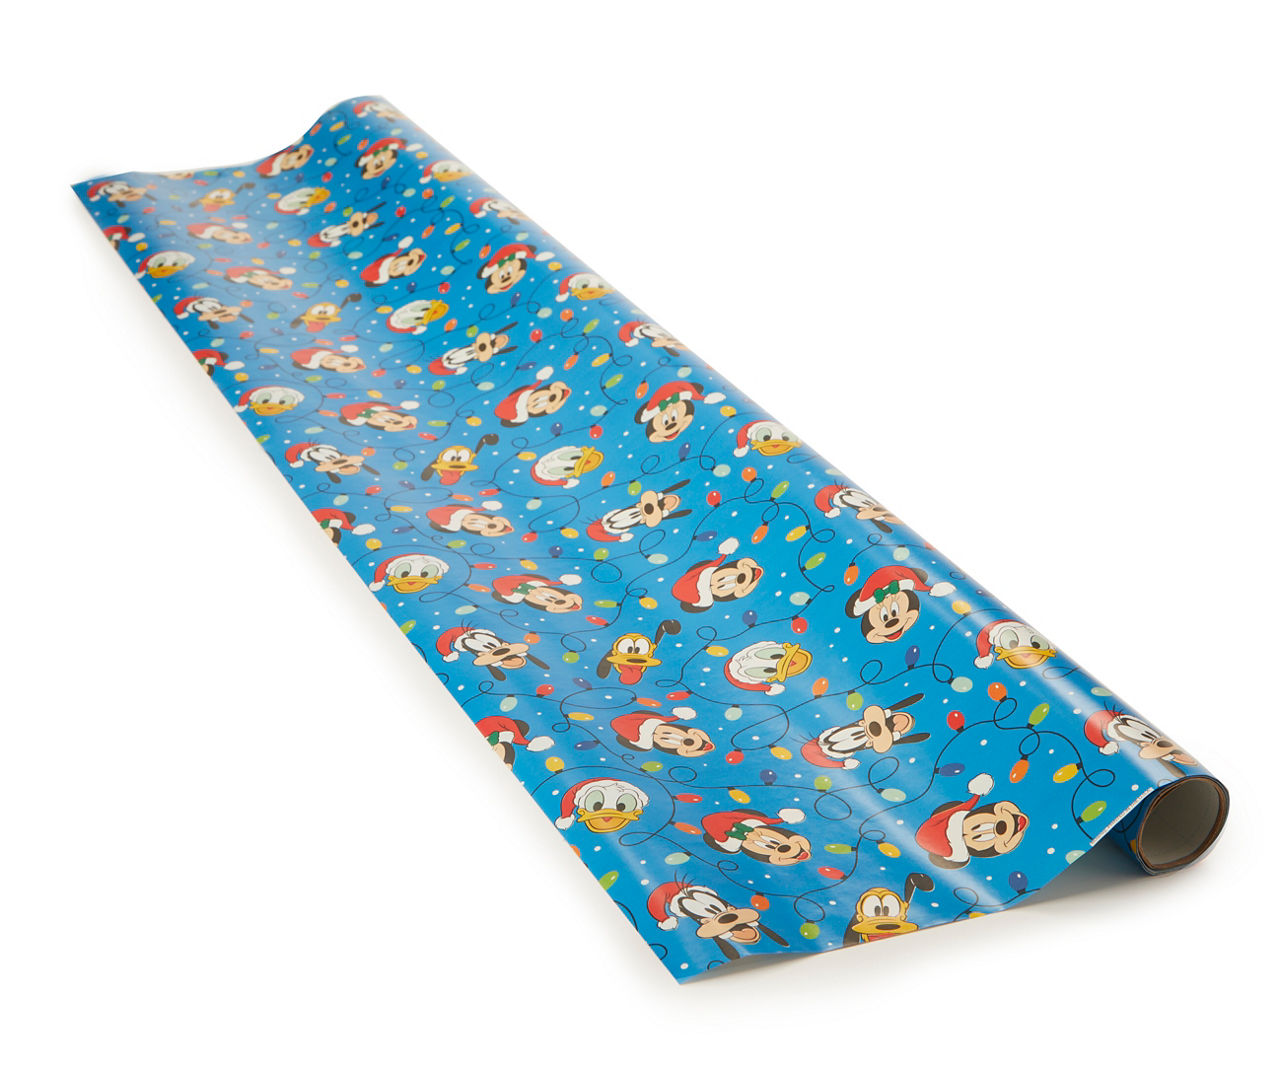 Disney Christmas Wrapping Paper, Aesthetic Mickey Mouse gift wrapping sold  by Common Caril | SKU 40409922 | 50% OFF Printerval